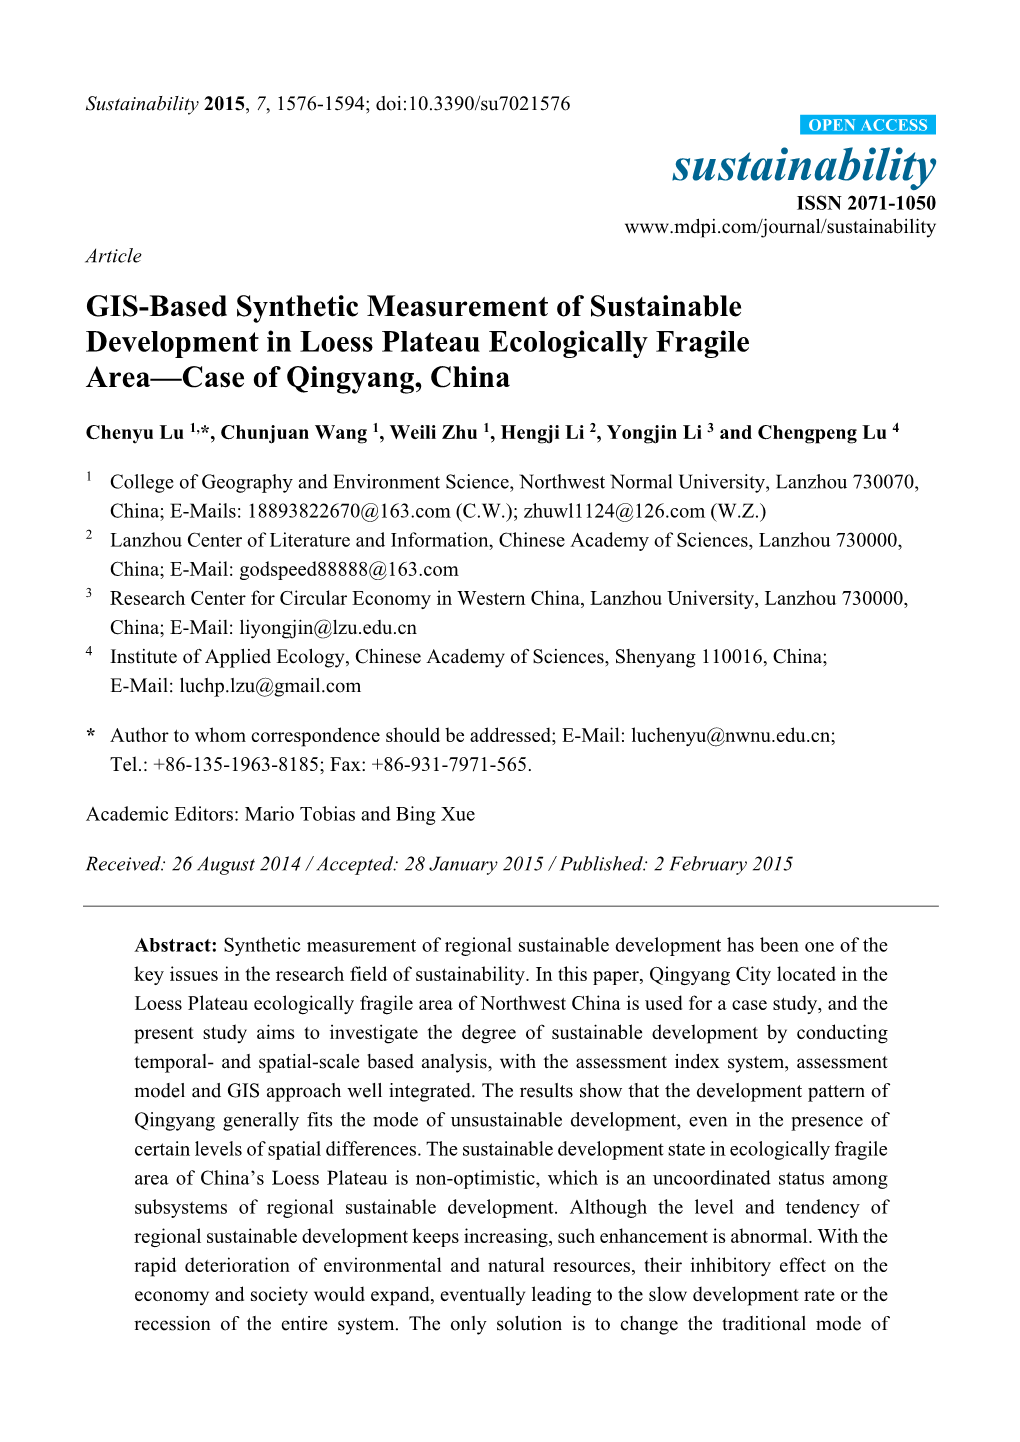 GIS-Based Synthetic Measurement of Sustainable Development in Loess Plateau Ecologically Fragile Area—Case of Qingyang, China